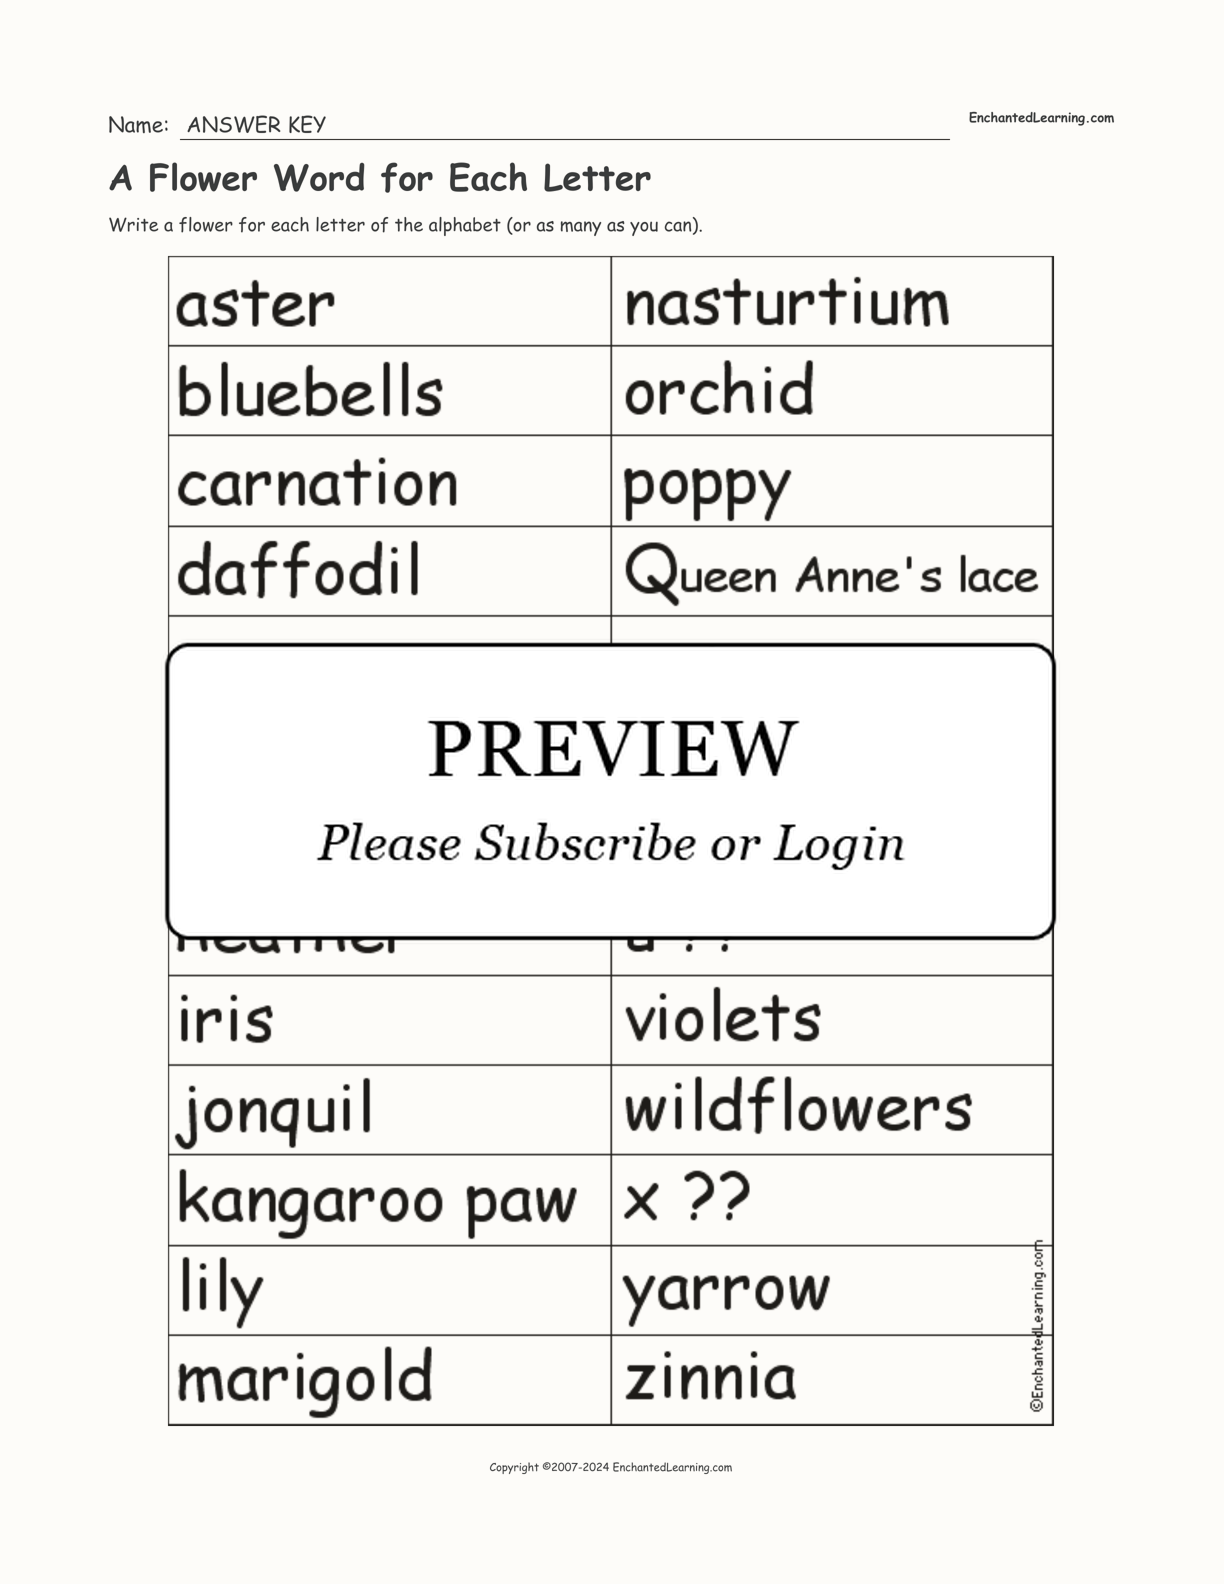 A Flower Word for Each Letter interactive worksheet page 2